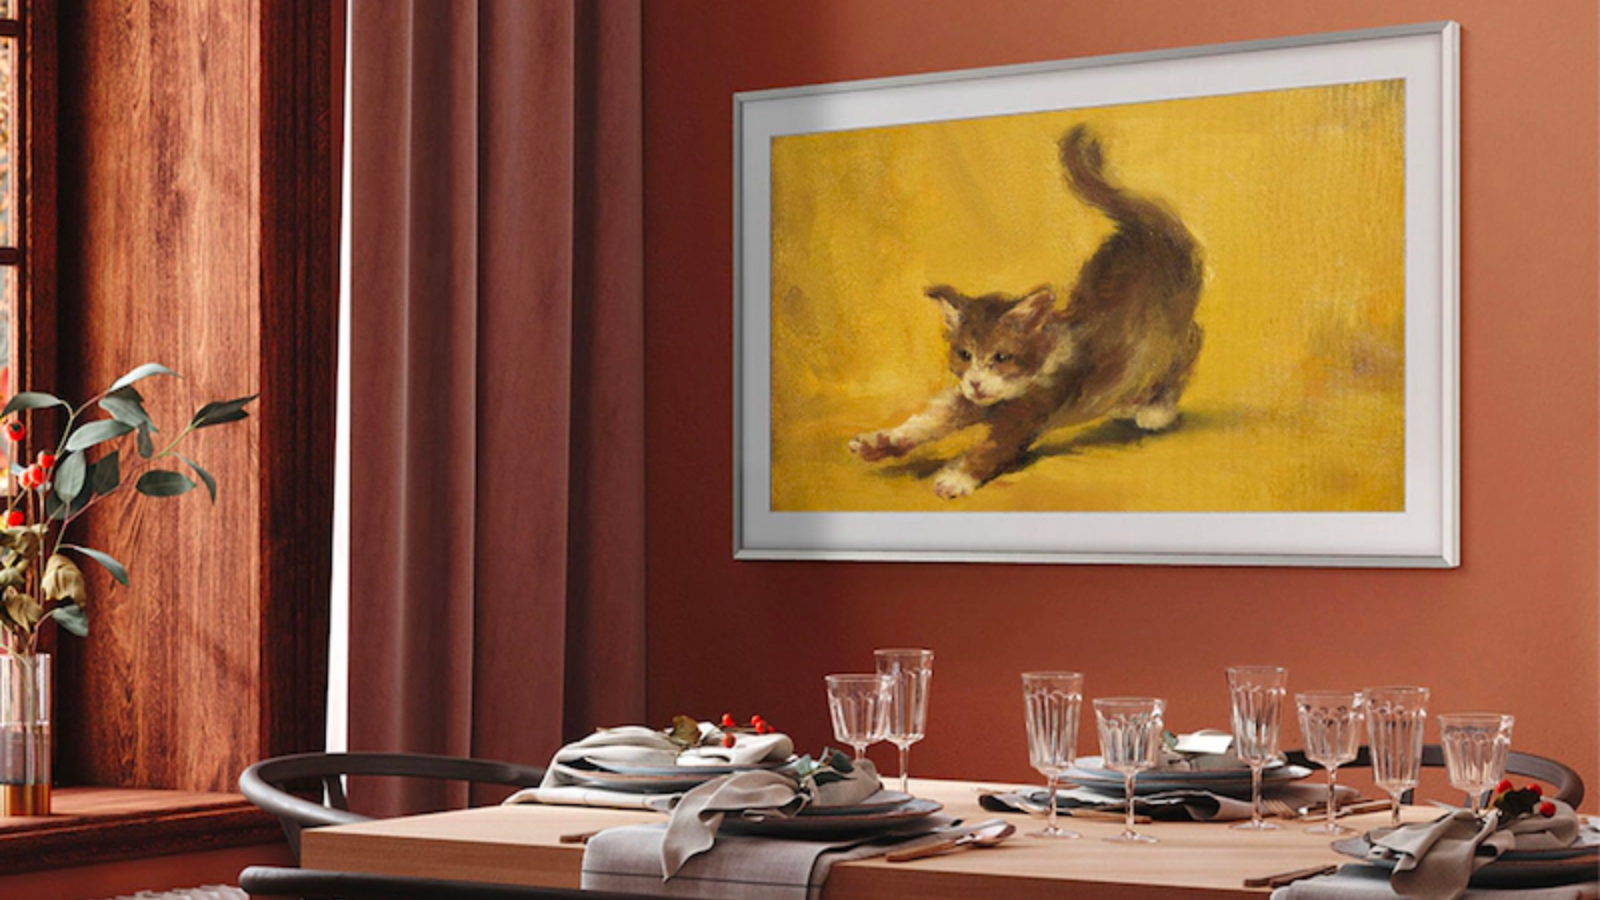 a samsung the frame tv displaying.a picture of a stretching kitten hangs on an orange wall above a set dinner table